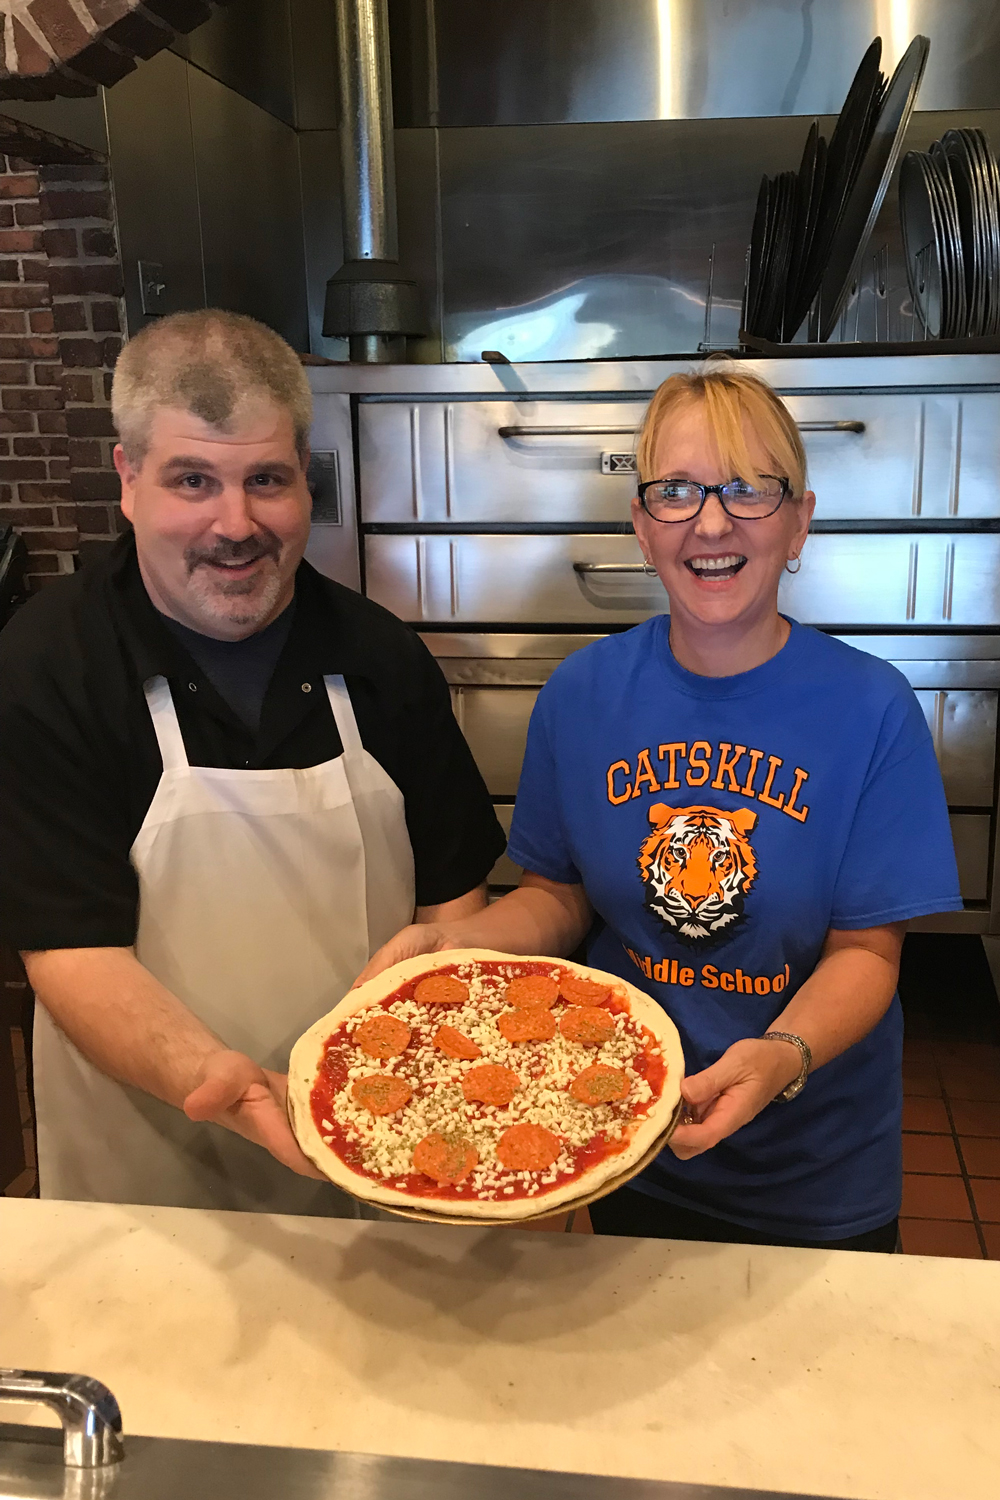 chef and teacher holding pizza